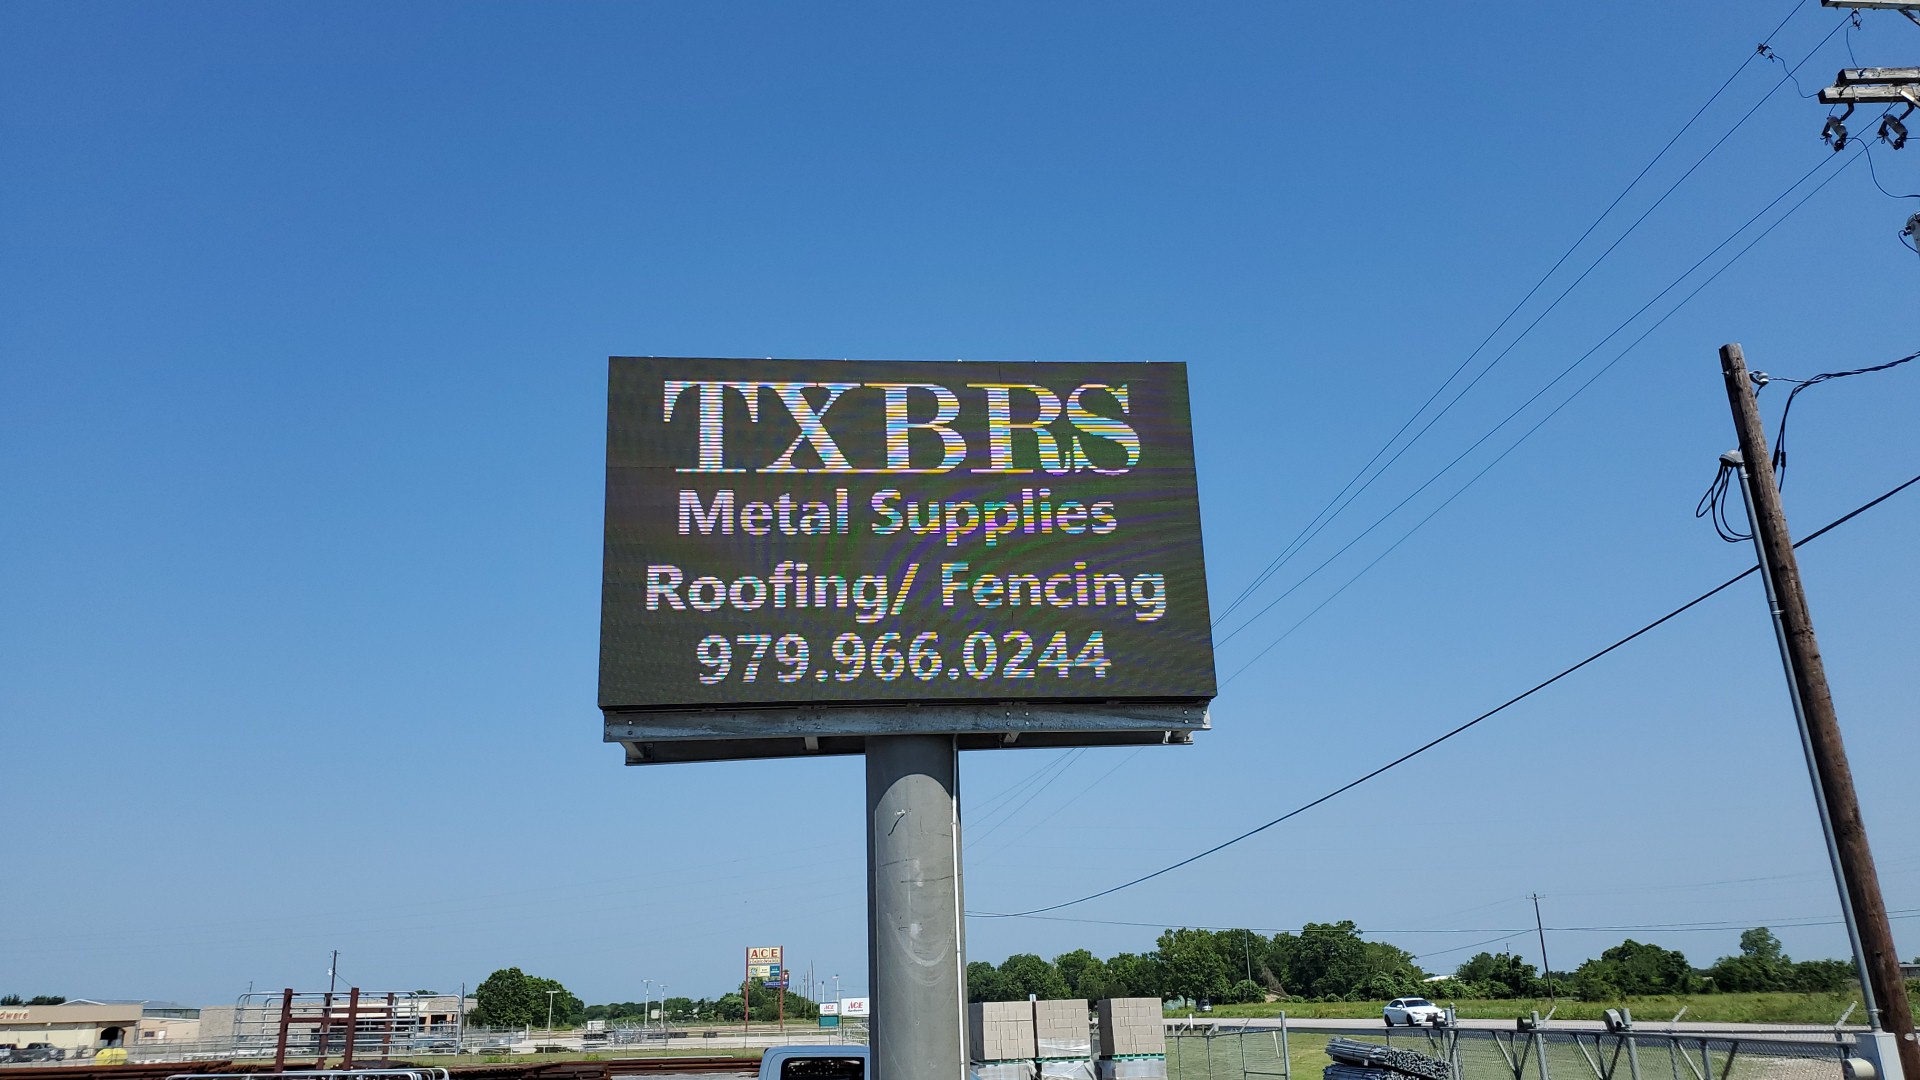 Texas Building & Roofing Supplies 3435 State Hwy 71, La Grange Texas 78945